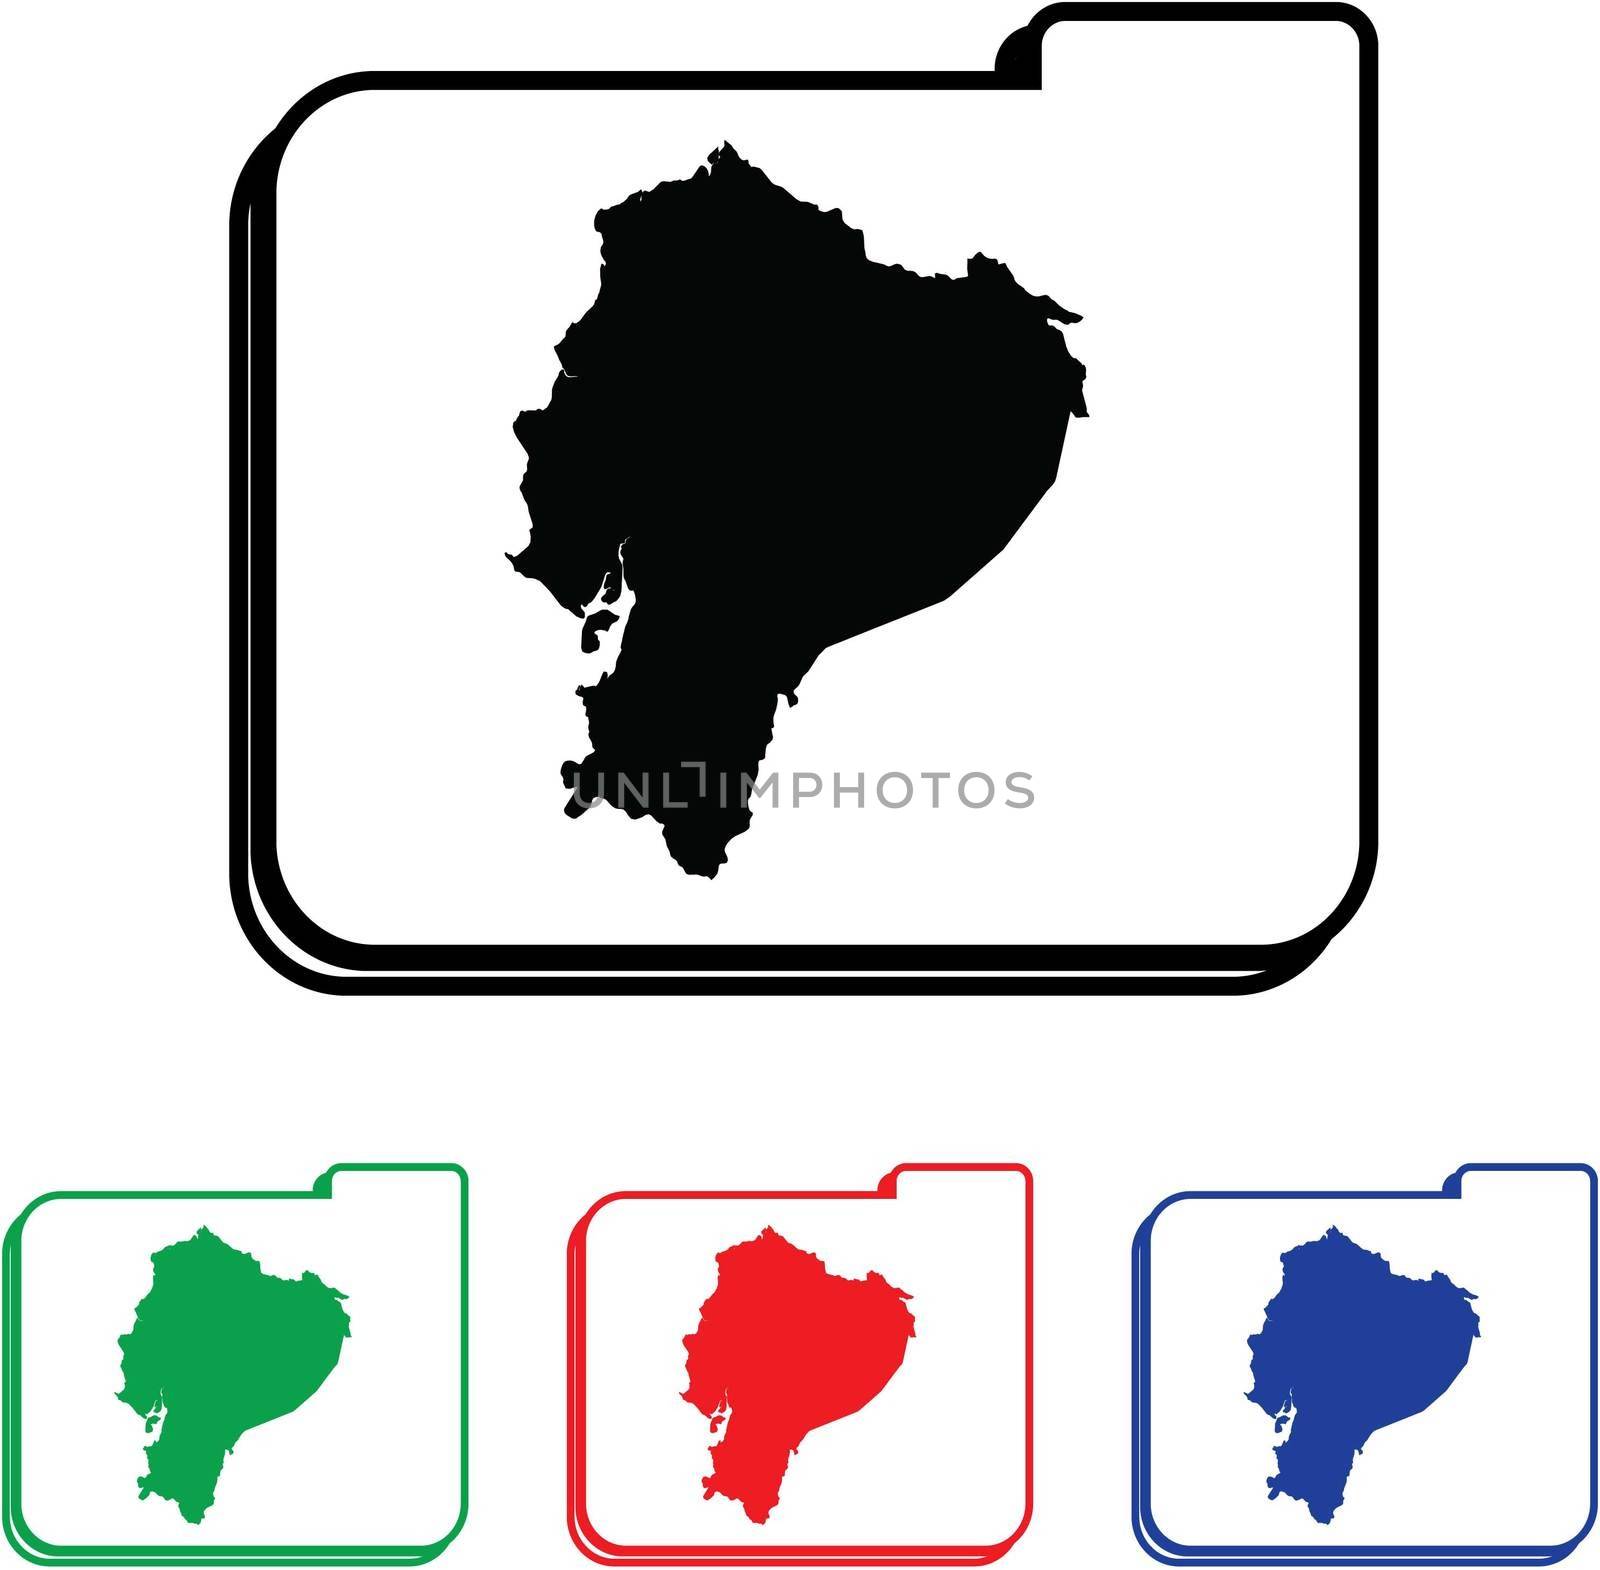 Ecuador Icon Illustration with Four Color Variations